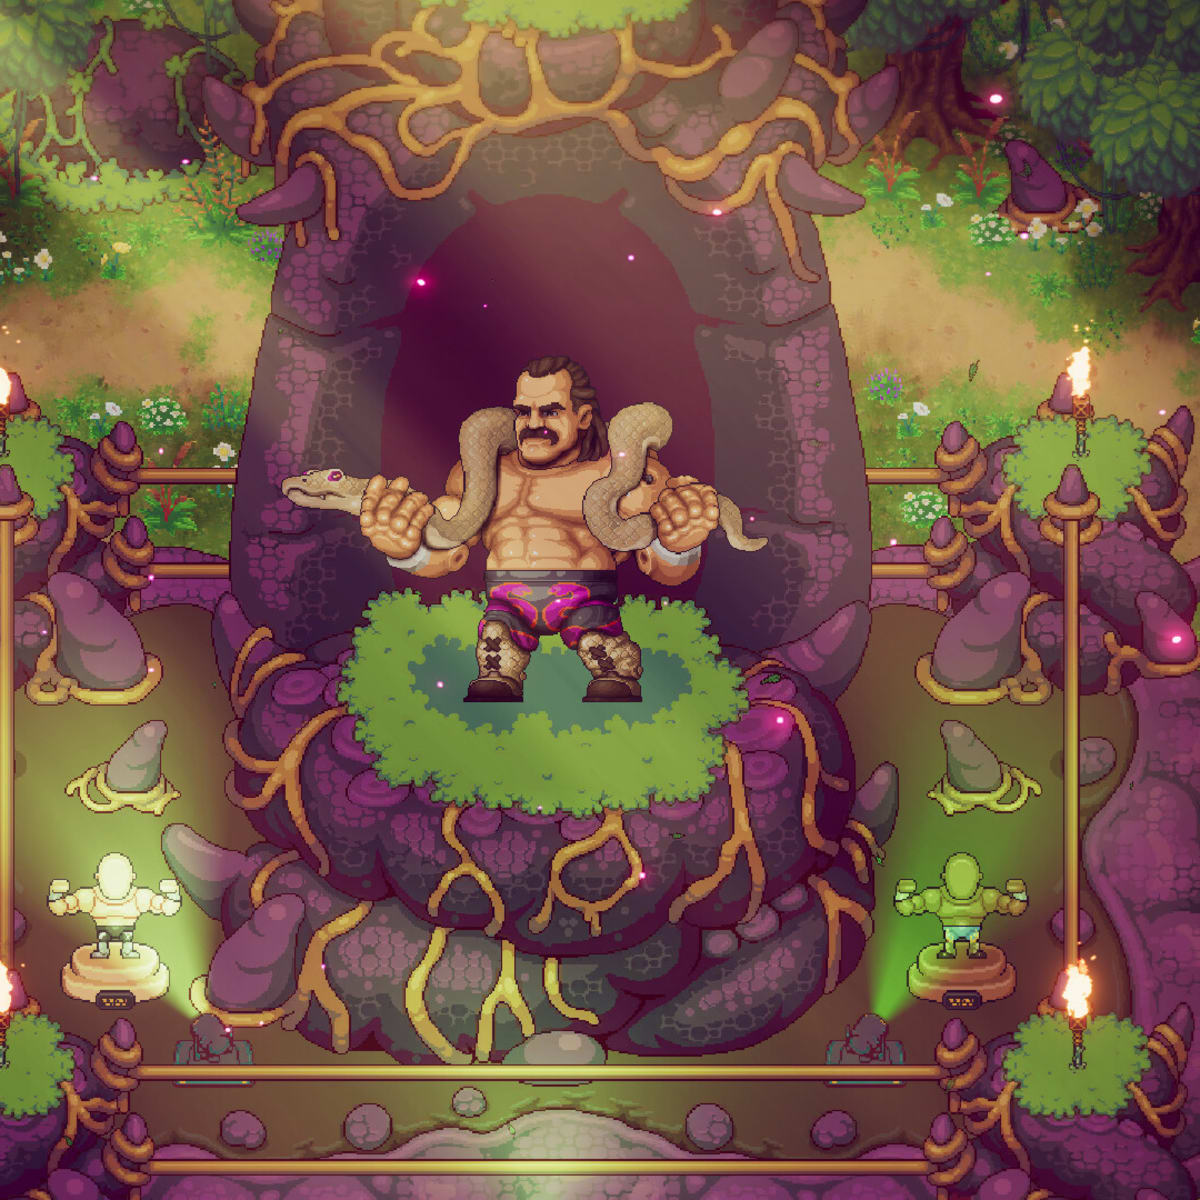 WrestleQuest Hands-On Preview - Tear Into the Spice - Operation Sports